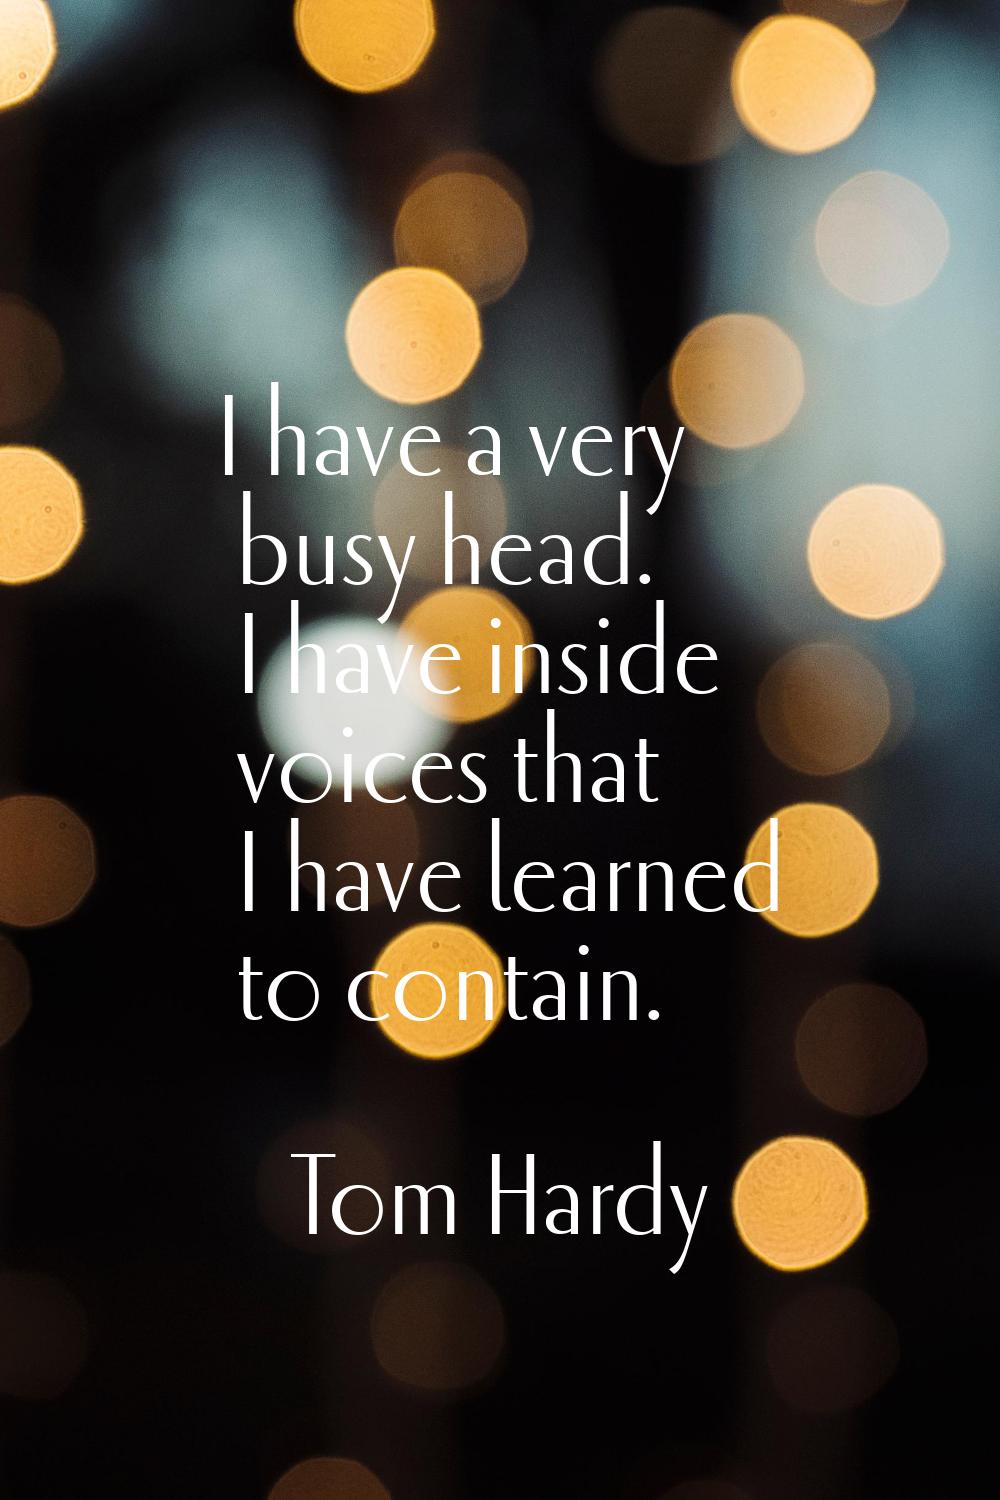 I have a very busy head. I have inside voices that I have learned to contain.